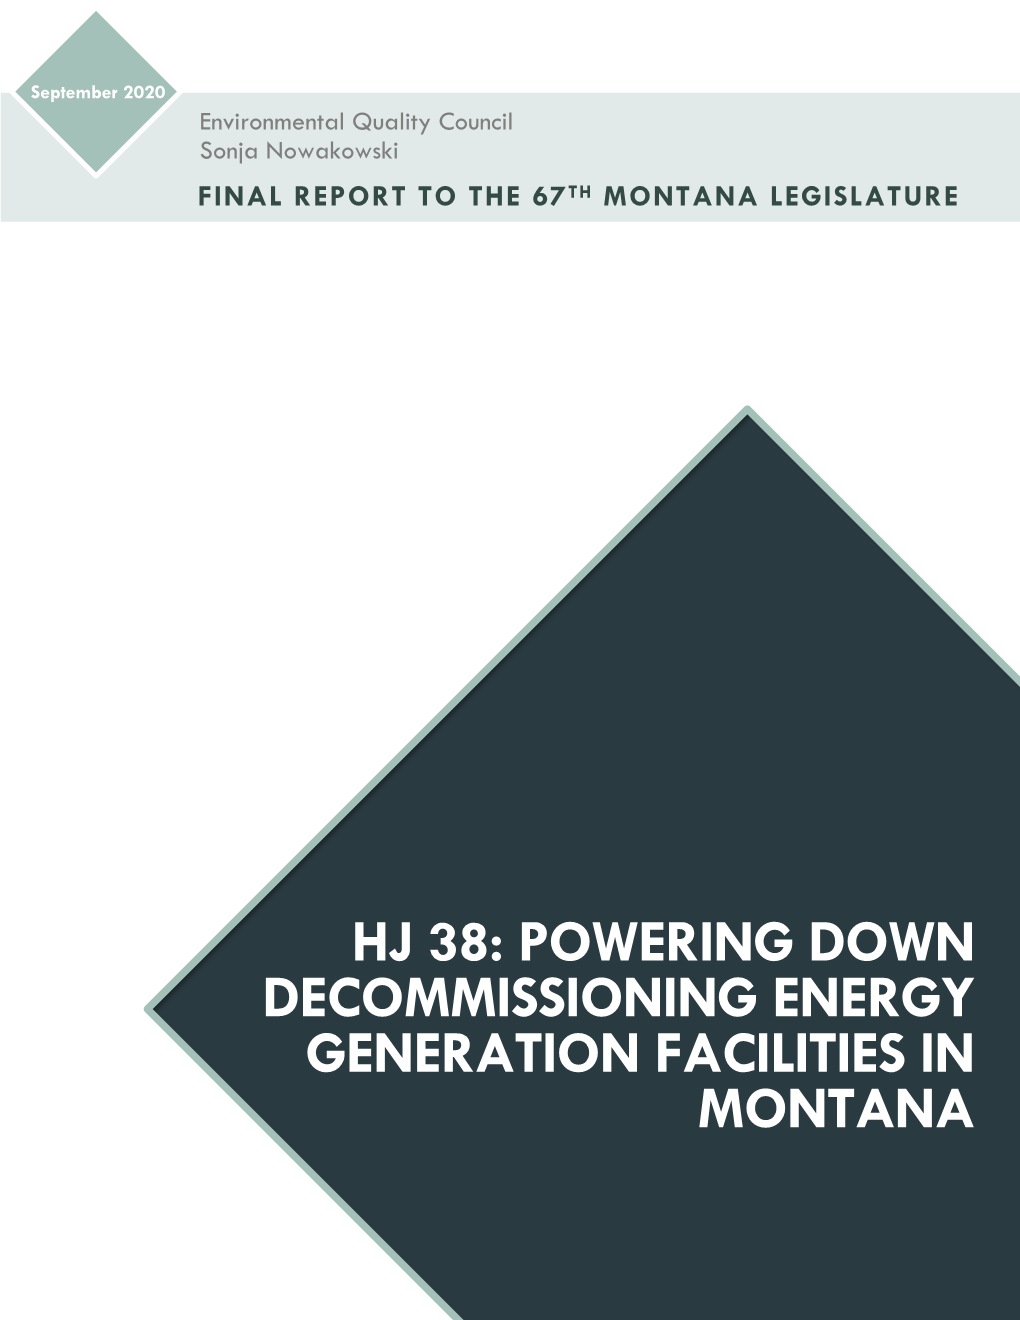 Hj 38: Powering Down Decommissioning Energy Generation Facilities in Montana